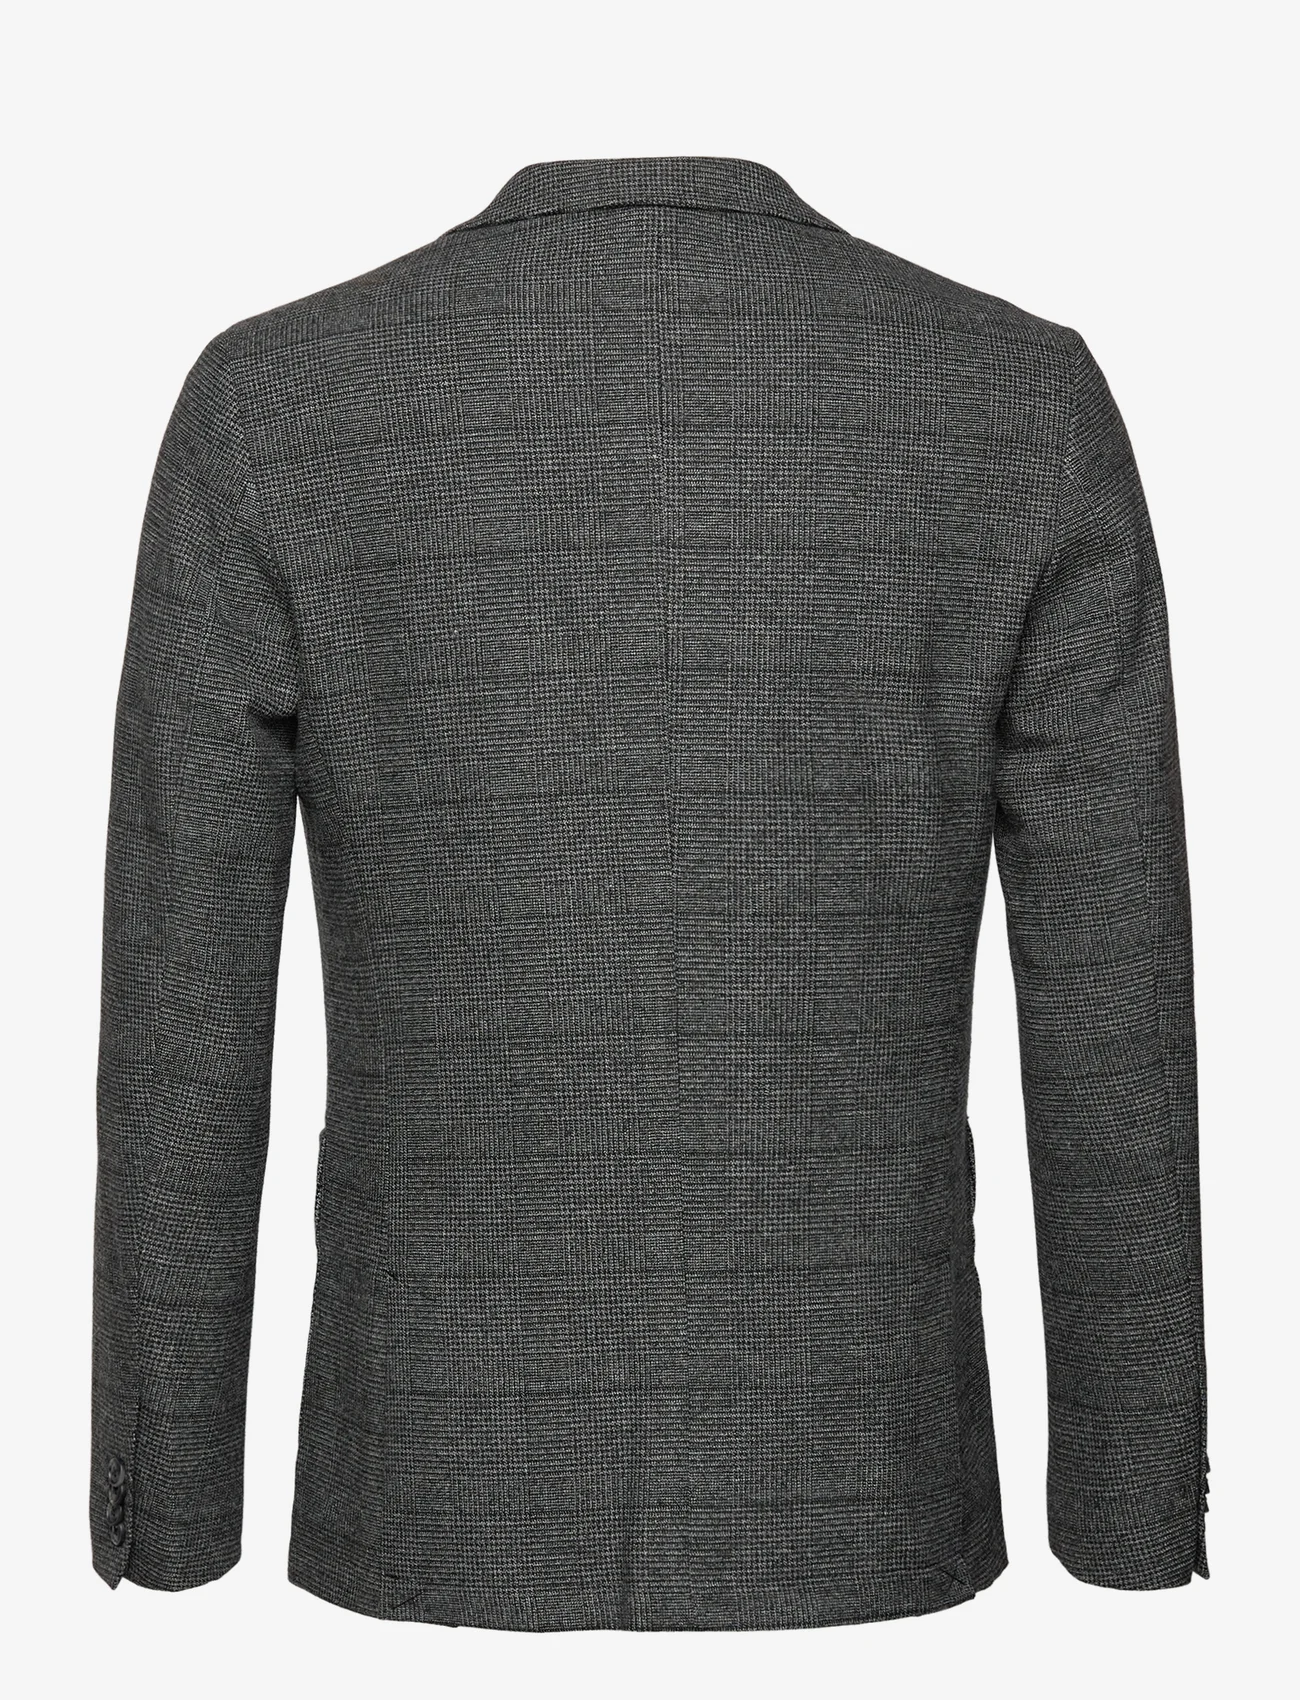 Tom Tailor - casual blazer - double breasted blazers - grey black grindle check - 1